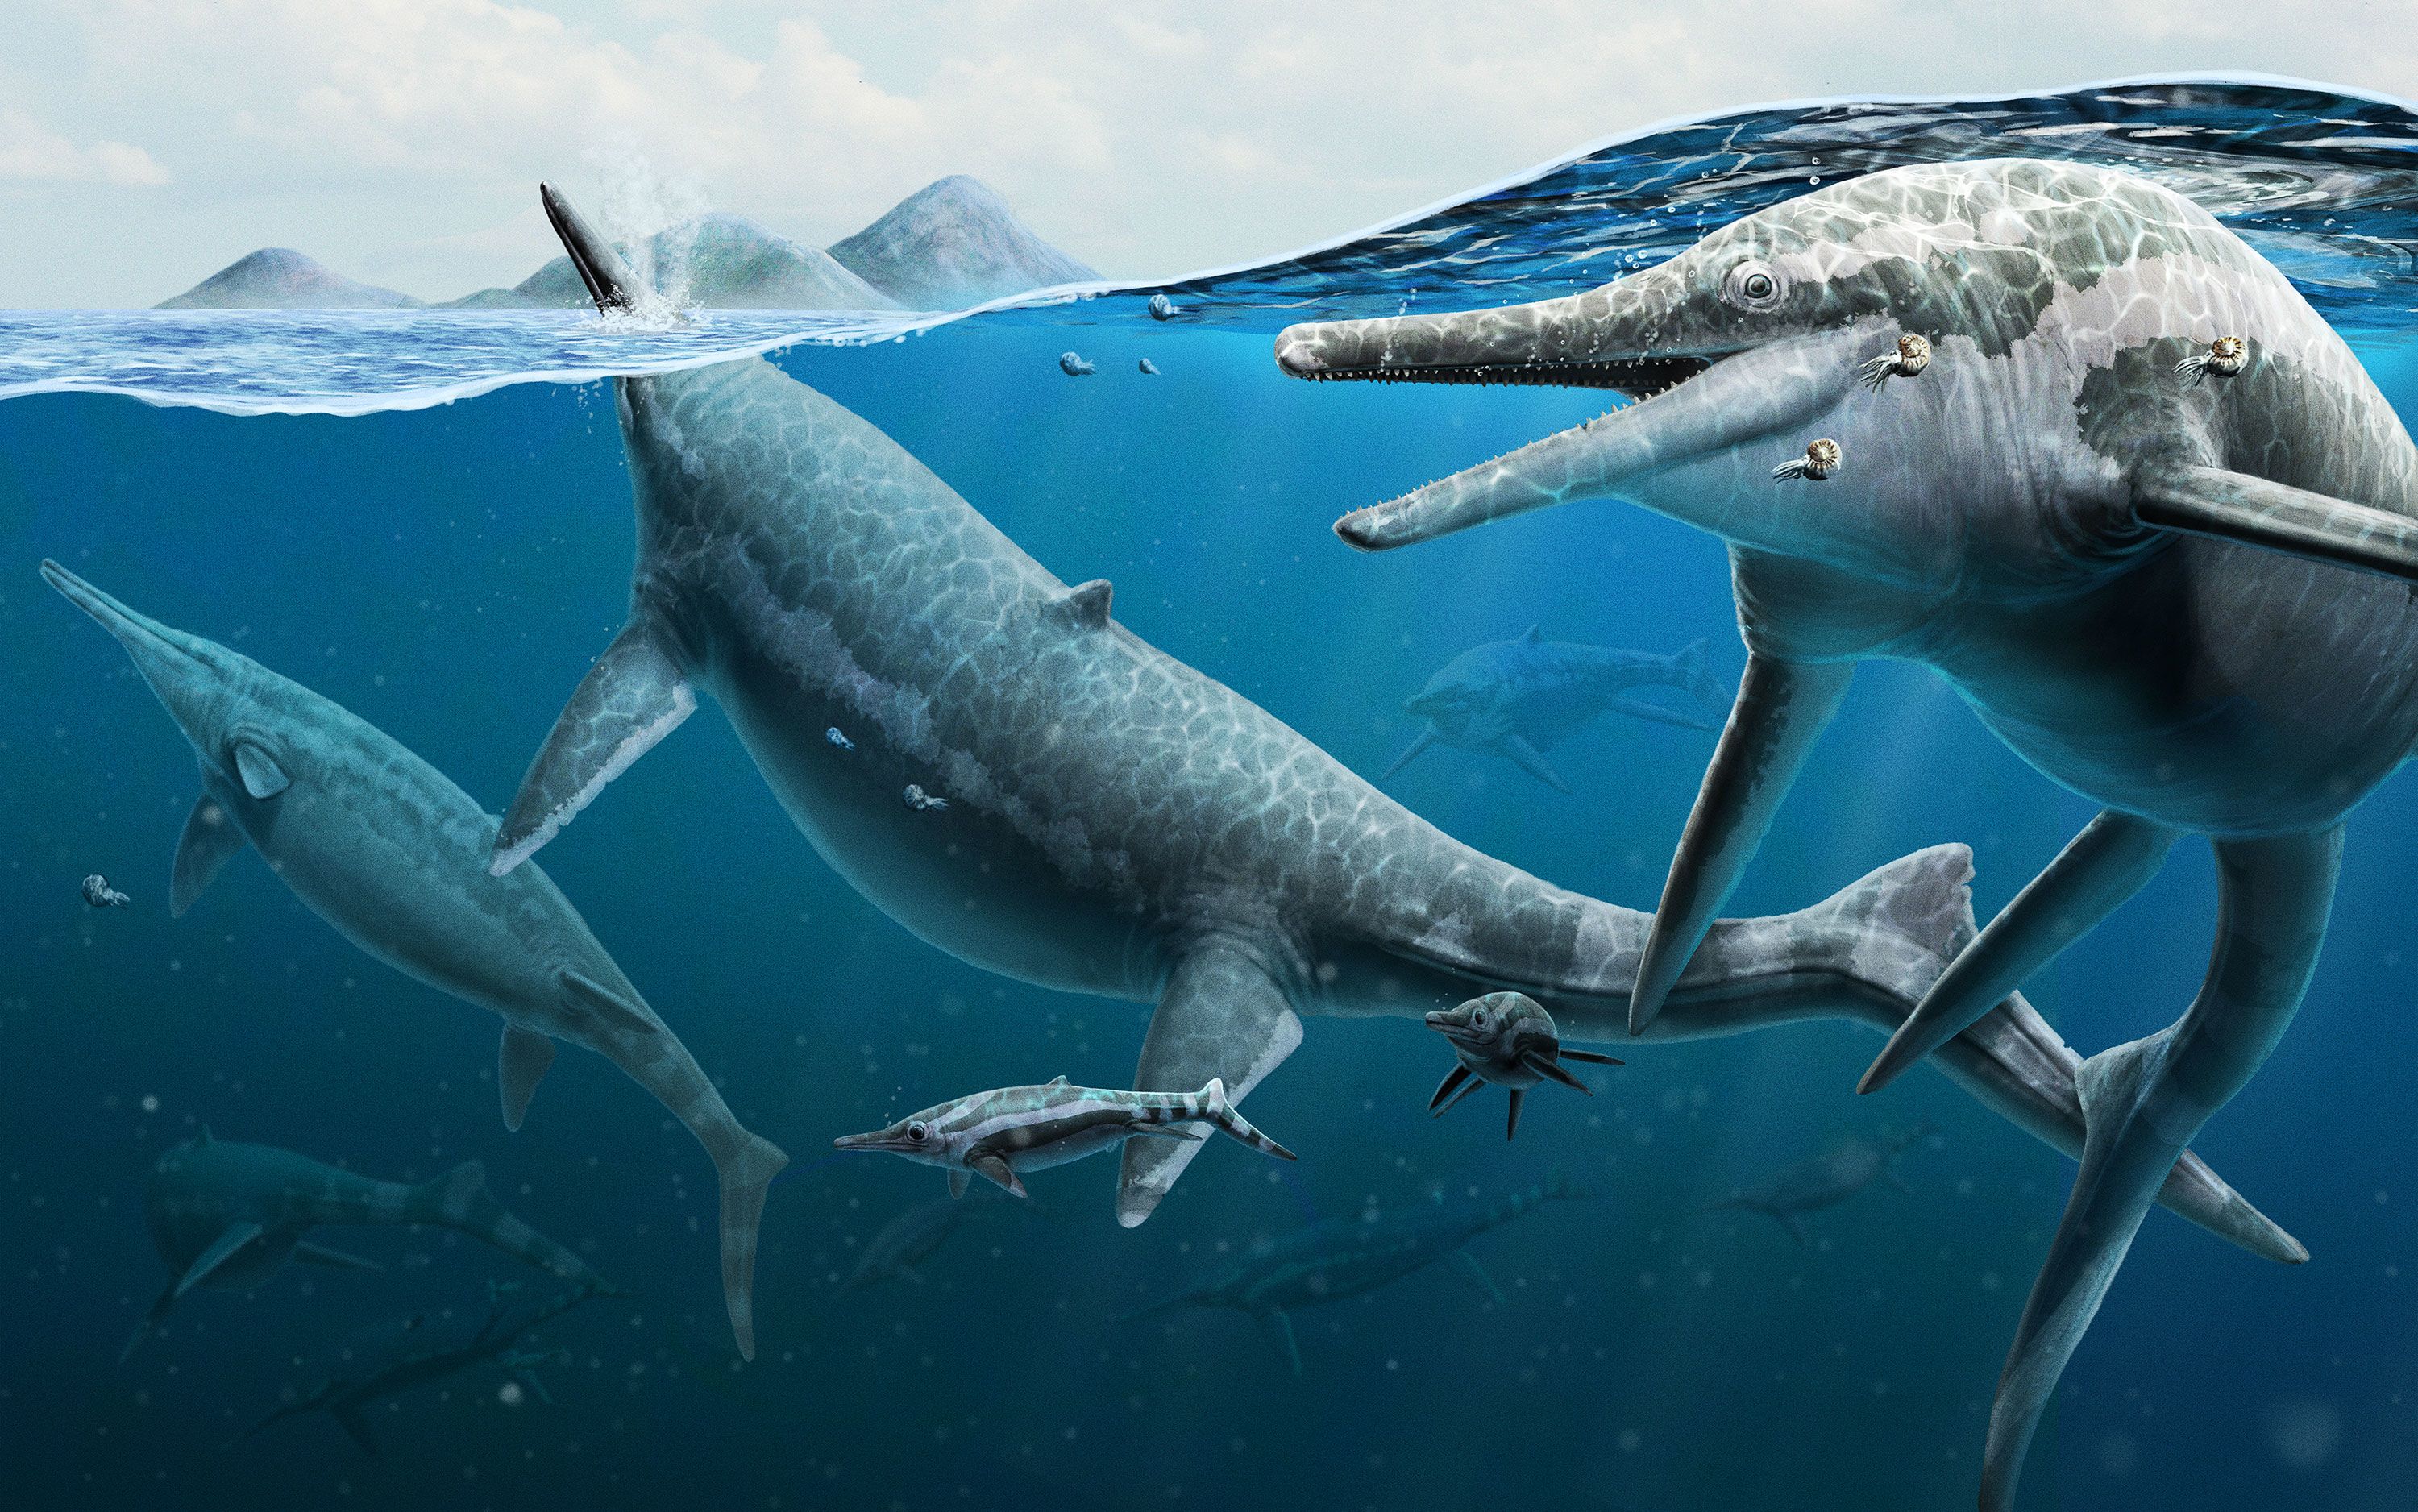 Fossil site was birthing ground for giant marine reptiles, study reveals |  CNN